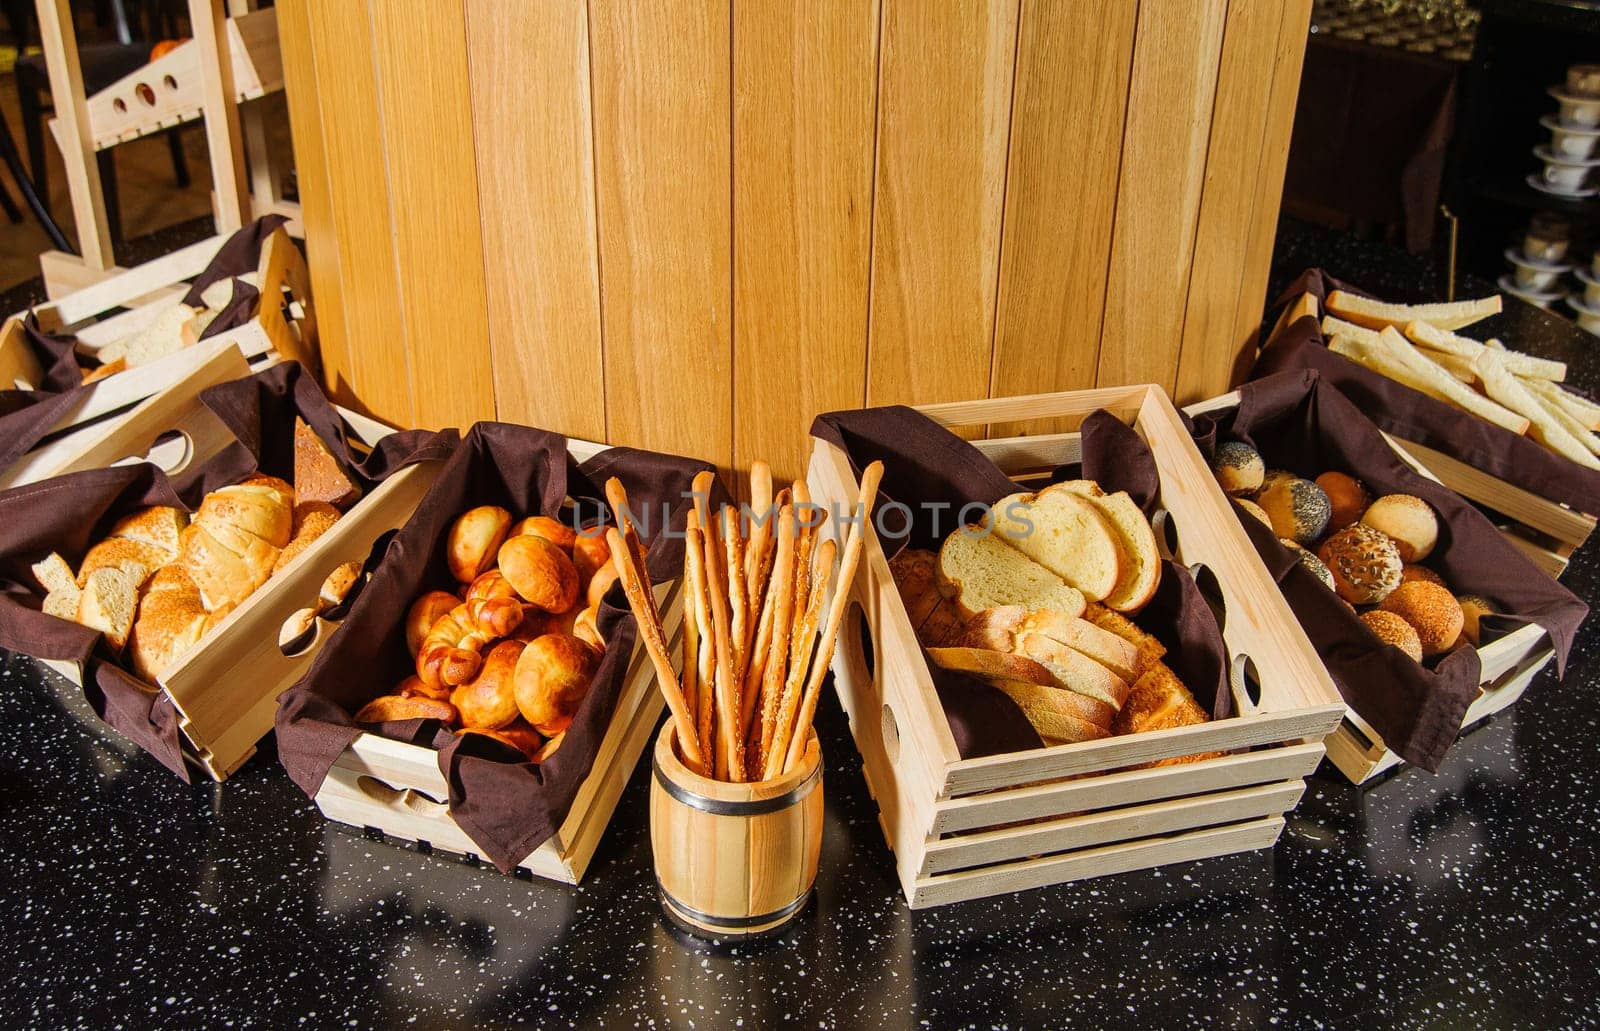 A buffet table with variety of bread in the wooden baskets